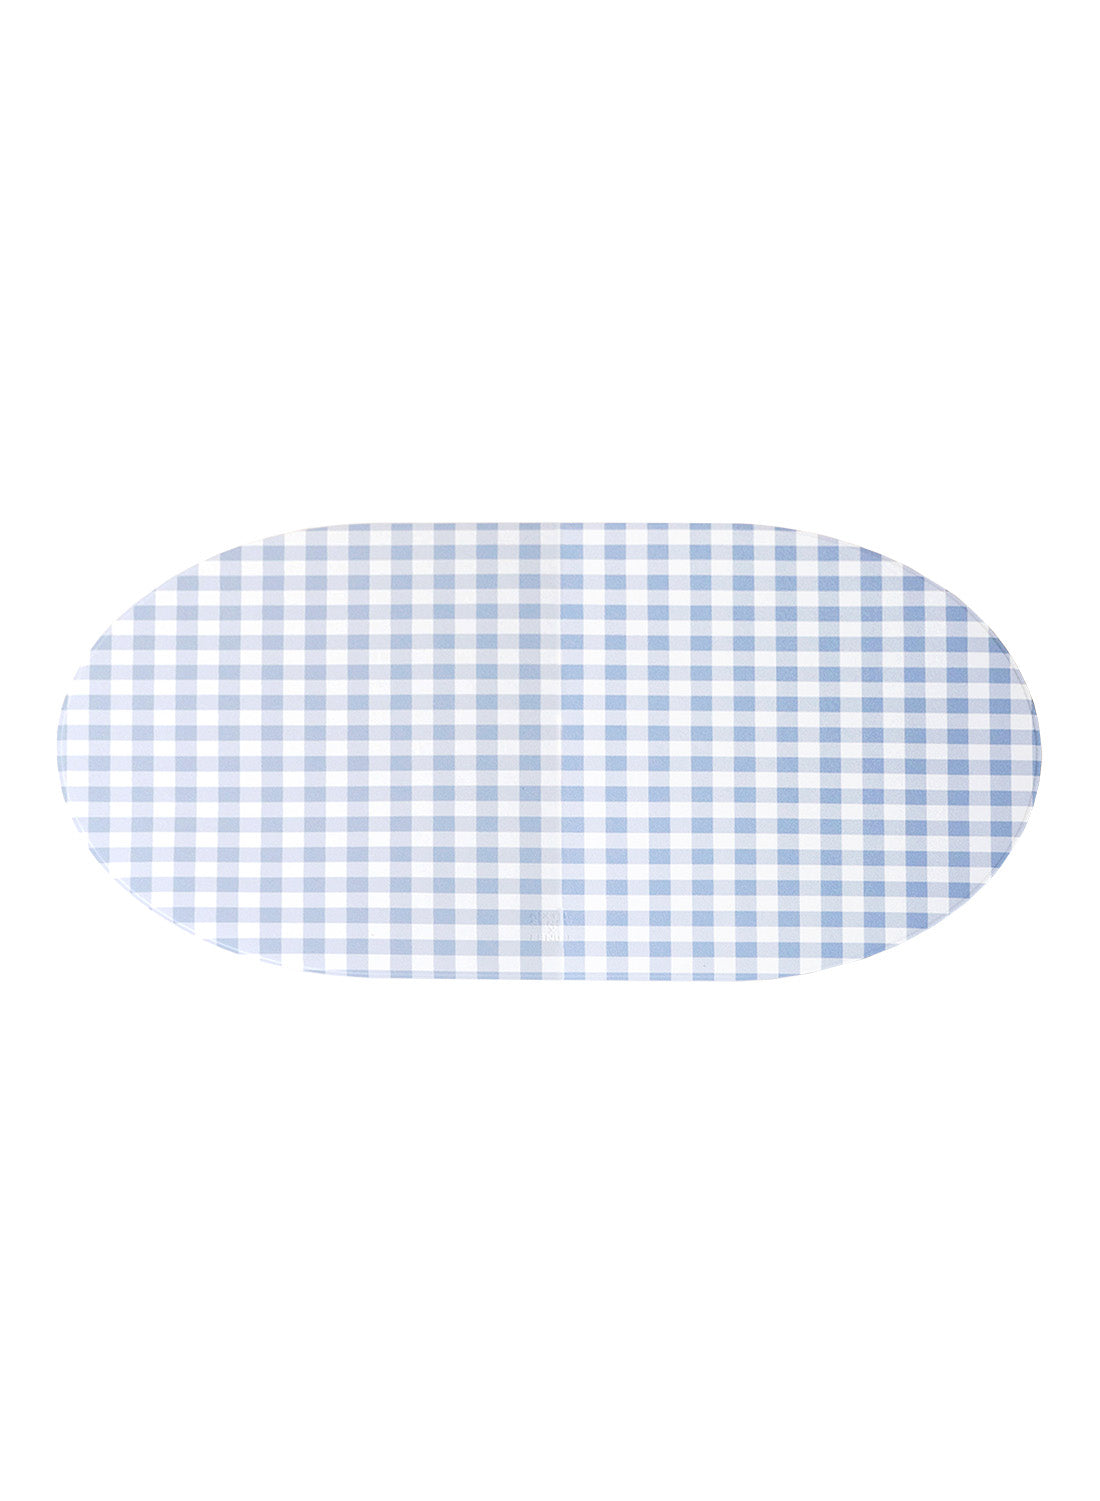 Fenice Gingham Placemat, Sky Blue